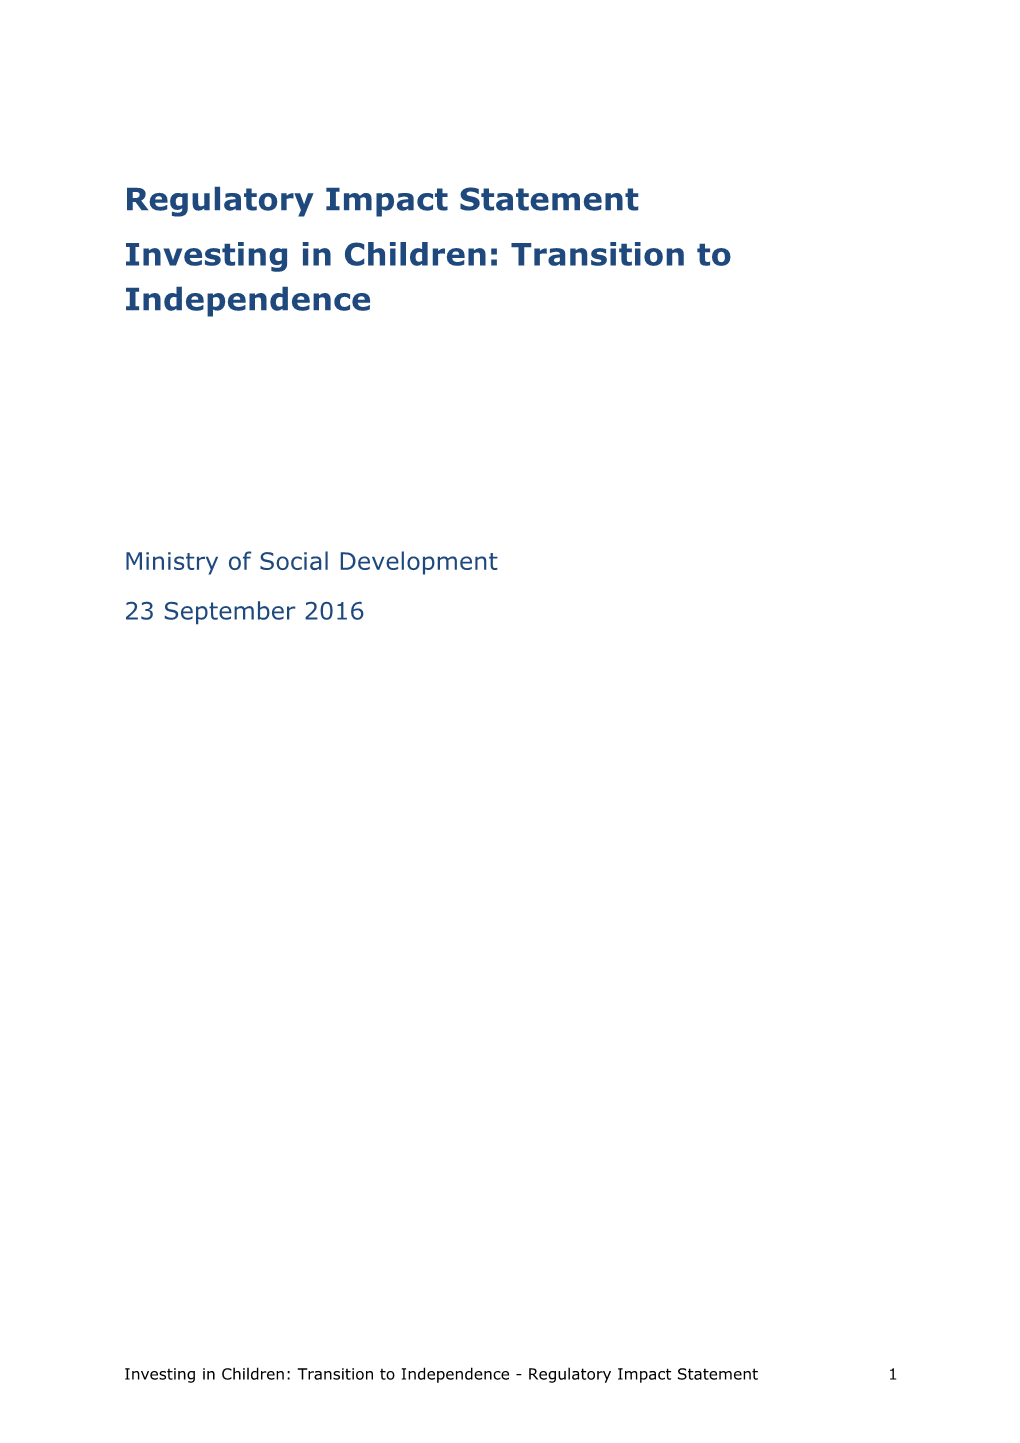 Investing in Children: Transition to Independence